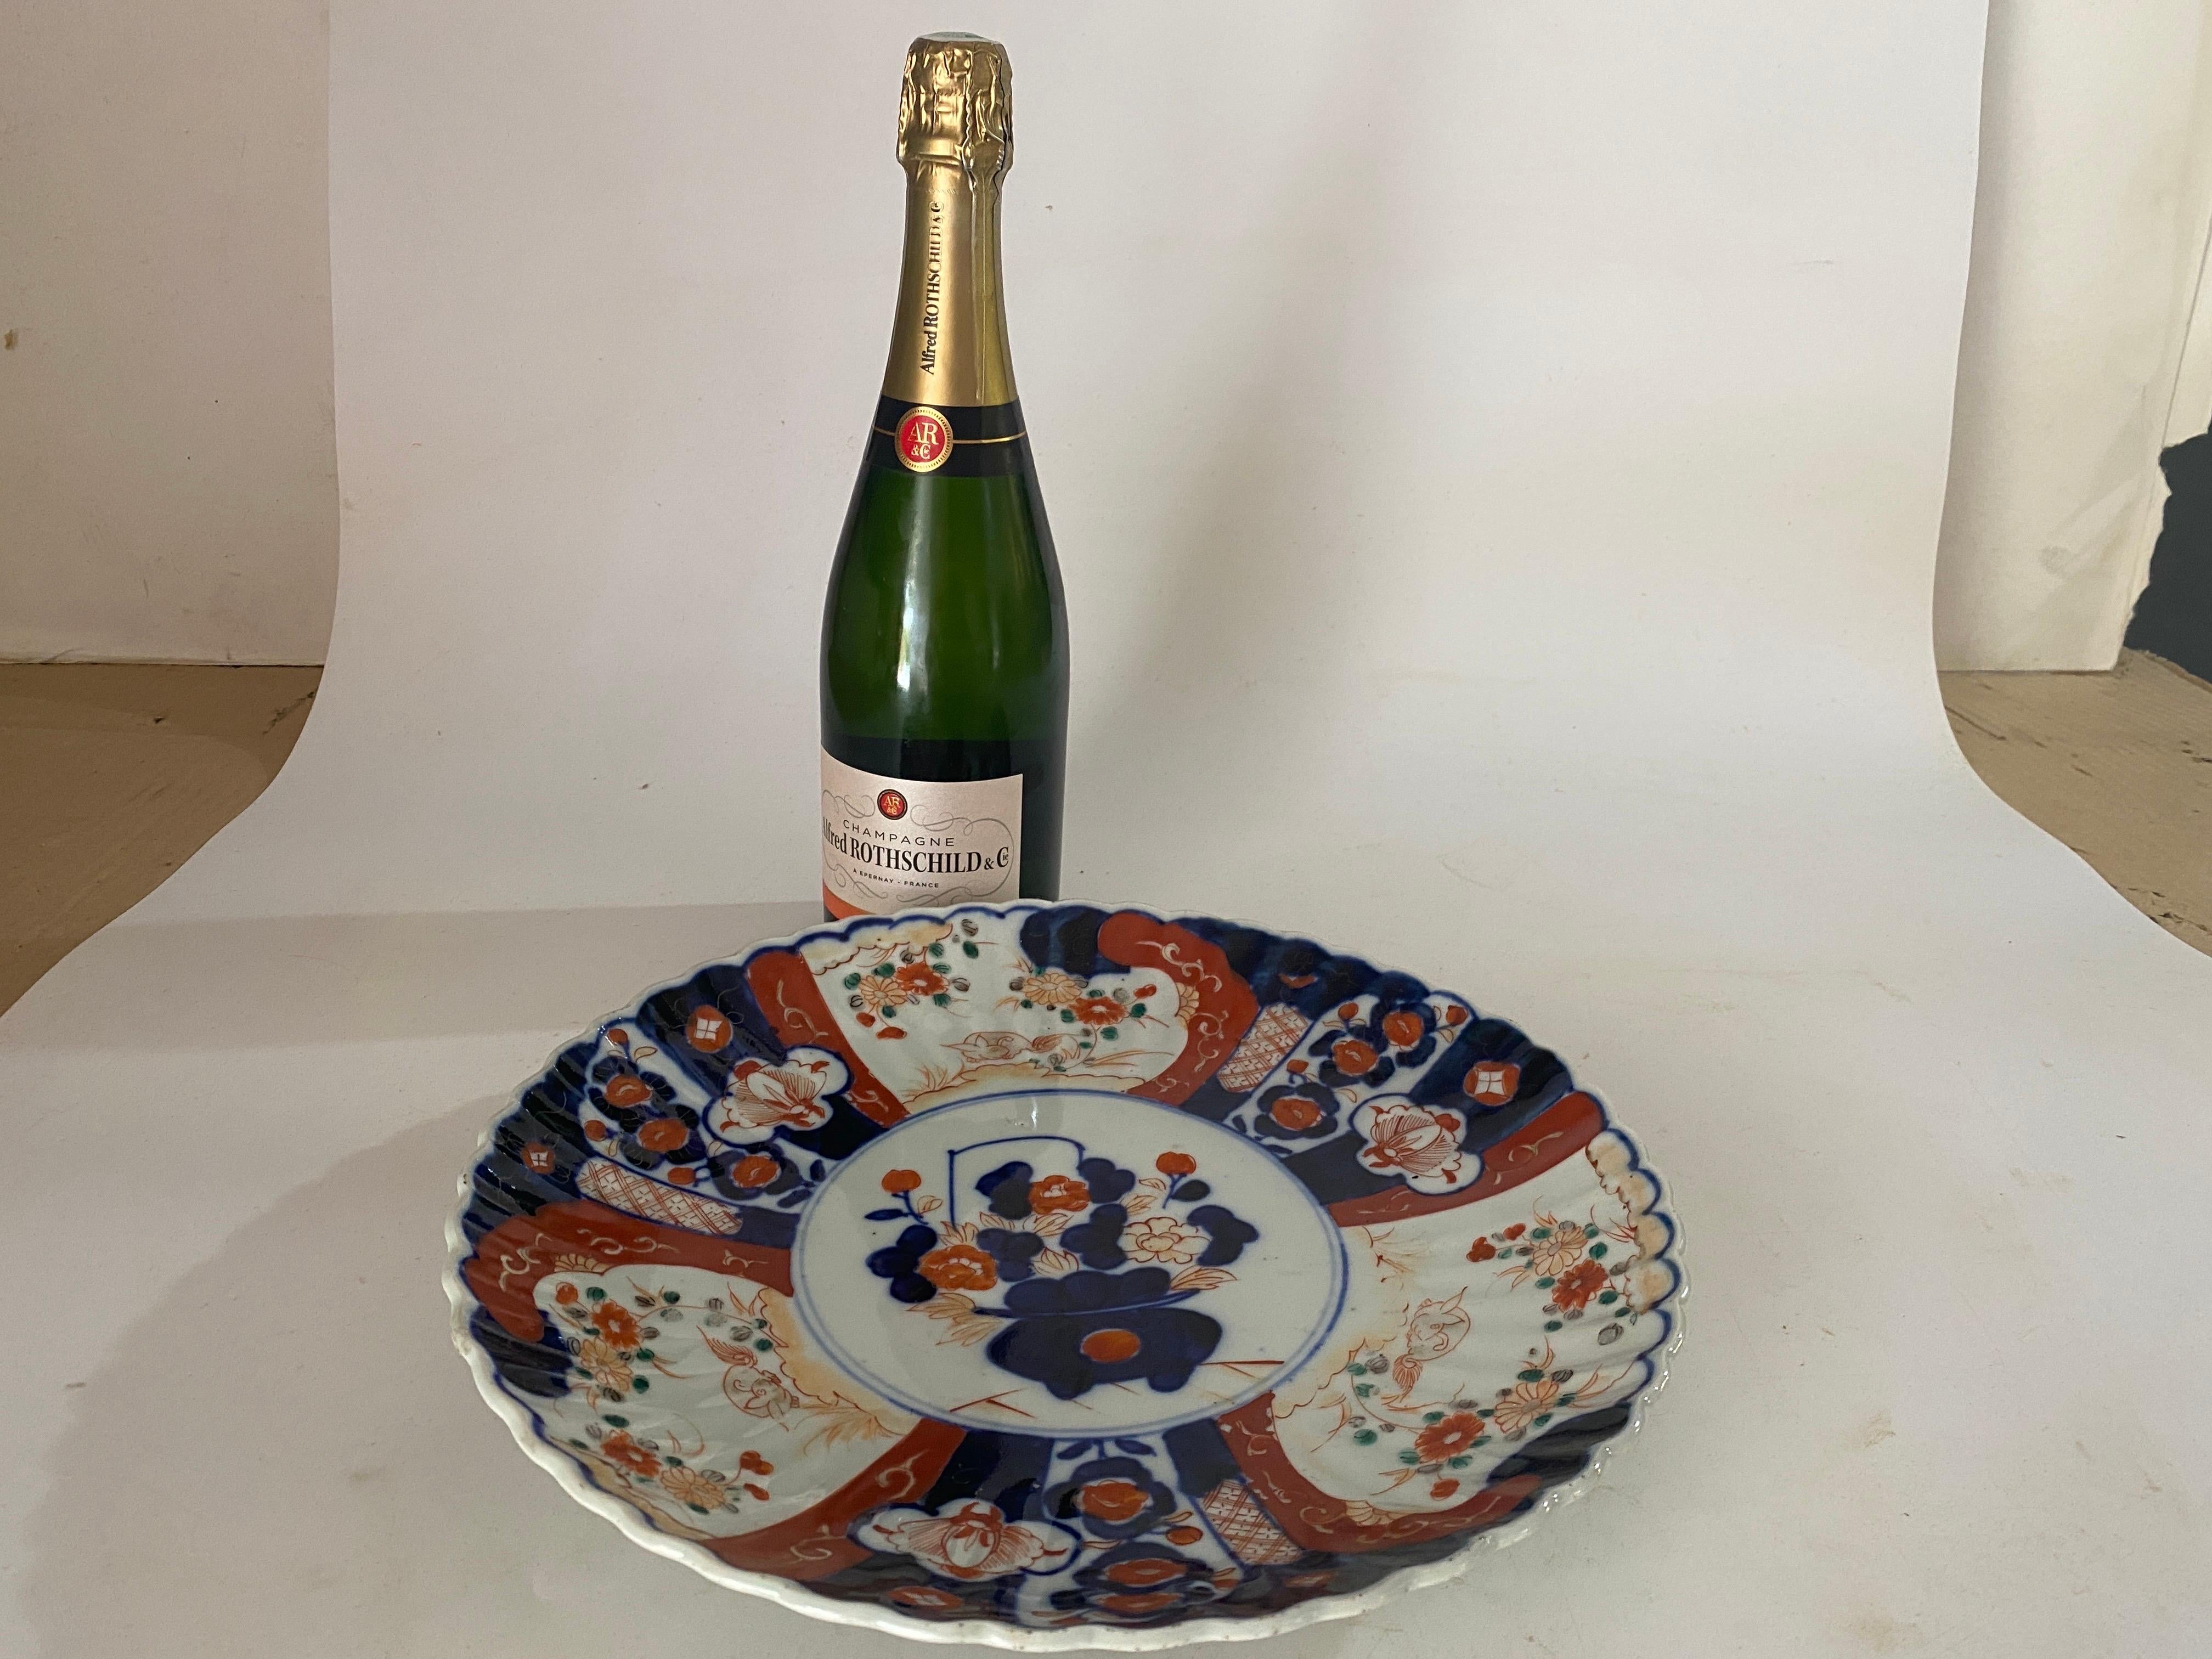 Japanese Dish or Charger, made in Japan at the beginning of the 19th century. With beautiful colors in red blue and white. The Item is in good condition.